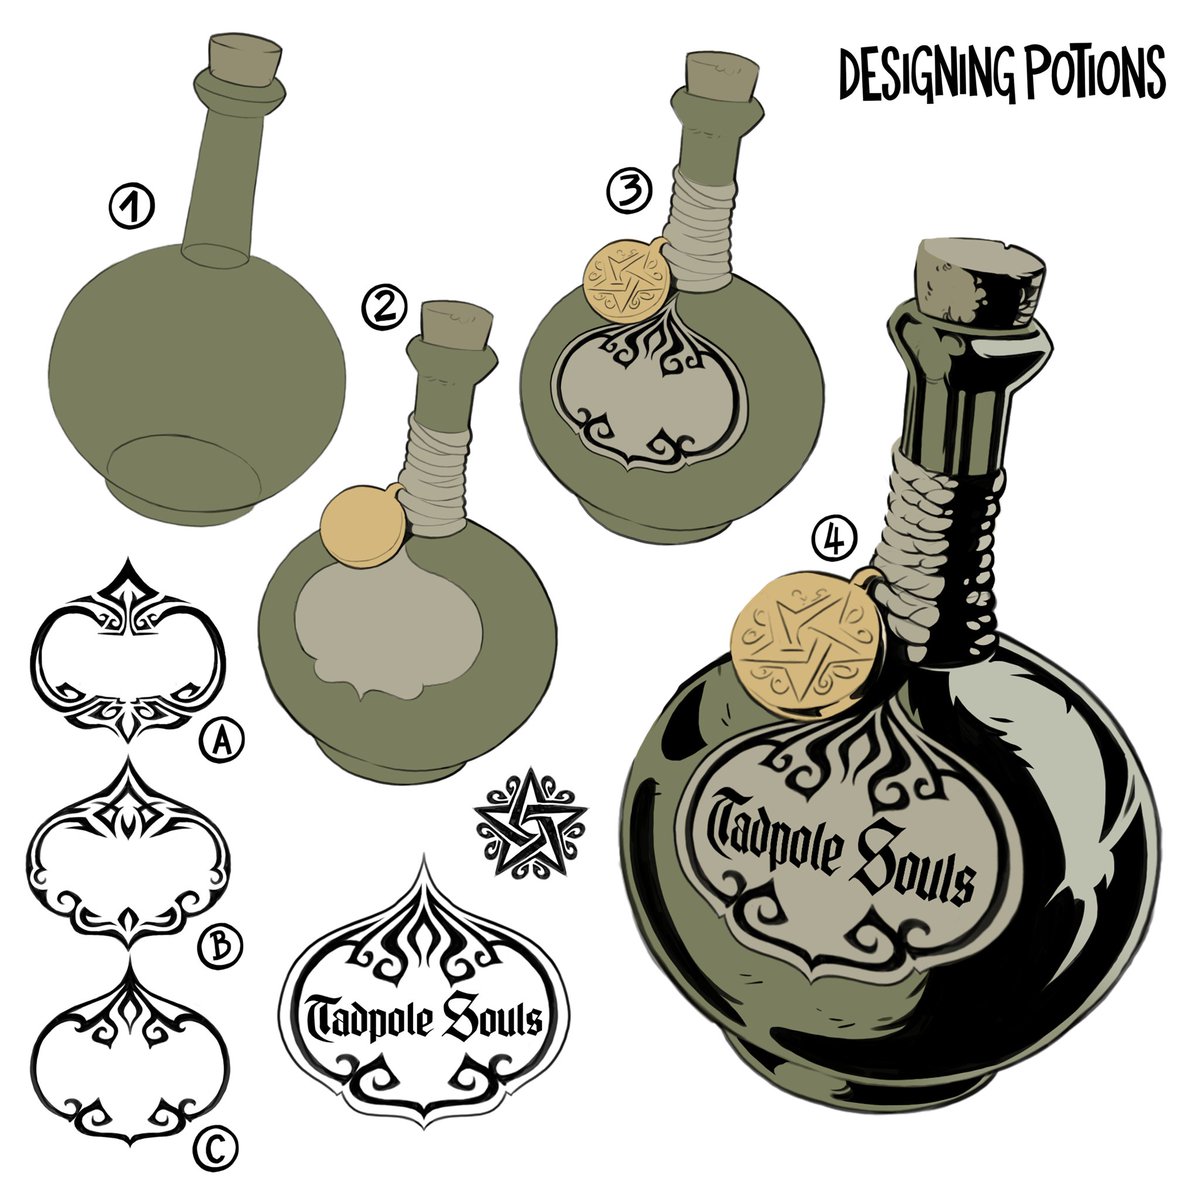 Here is a little extra piece on how to design potions.